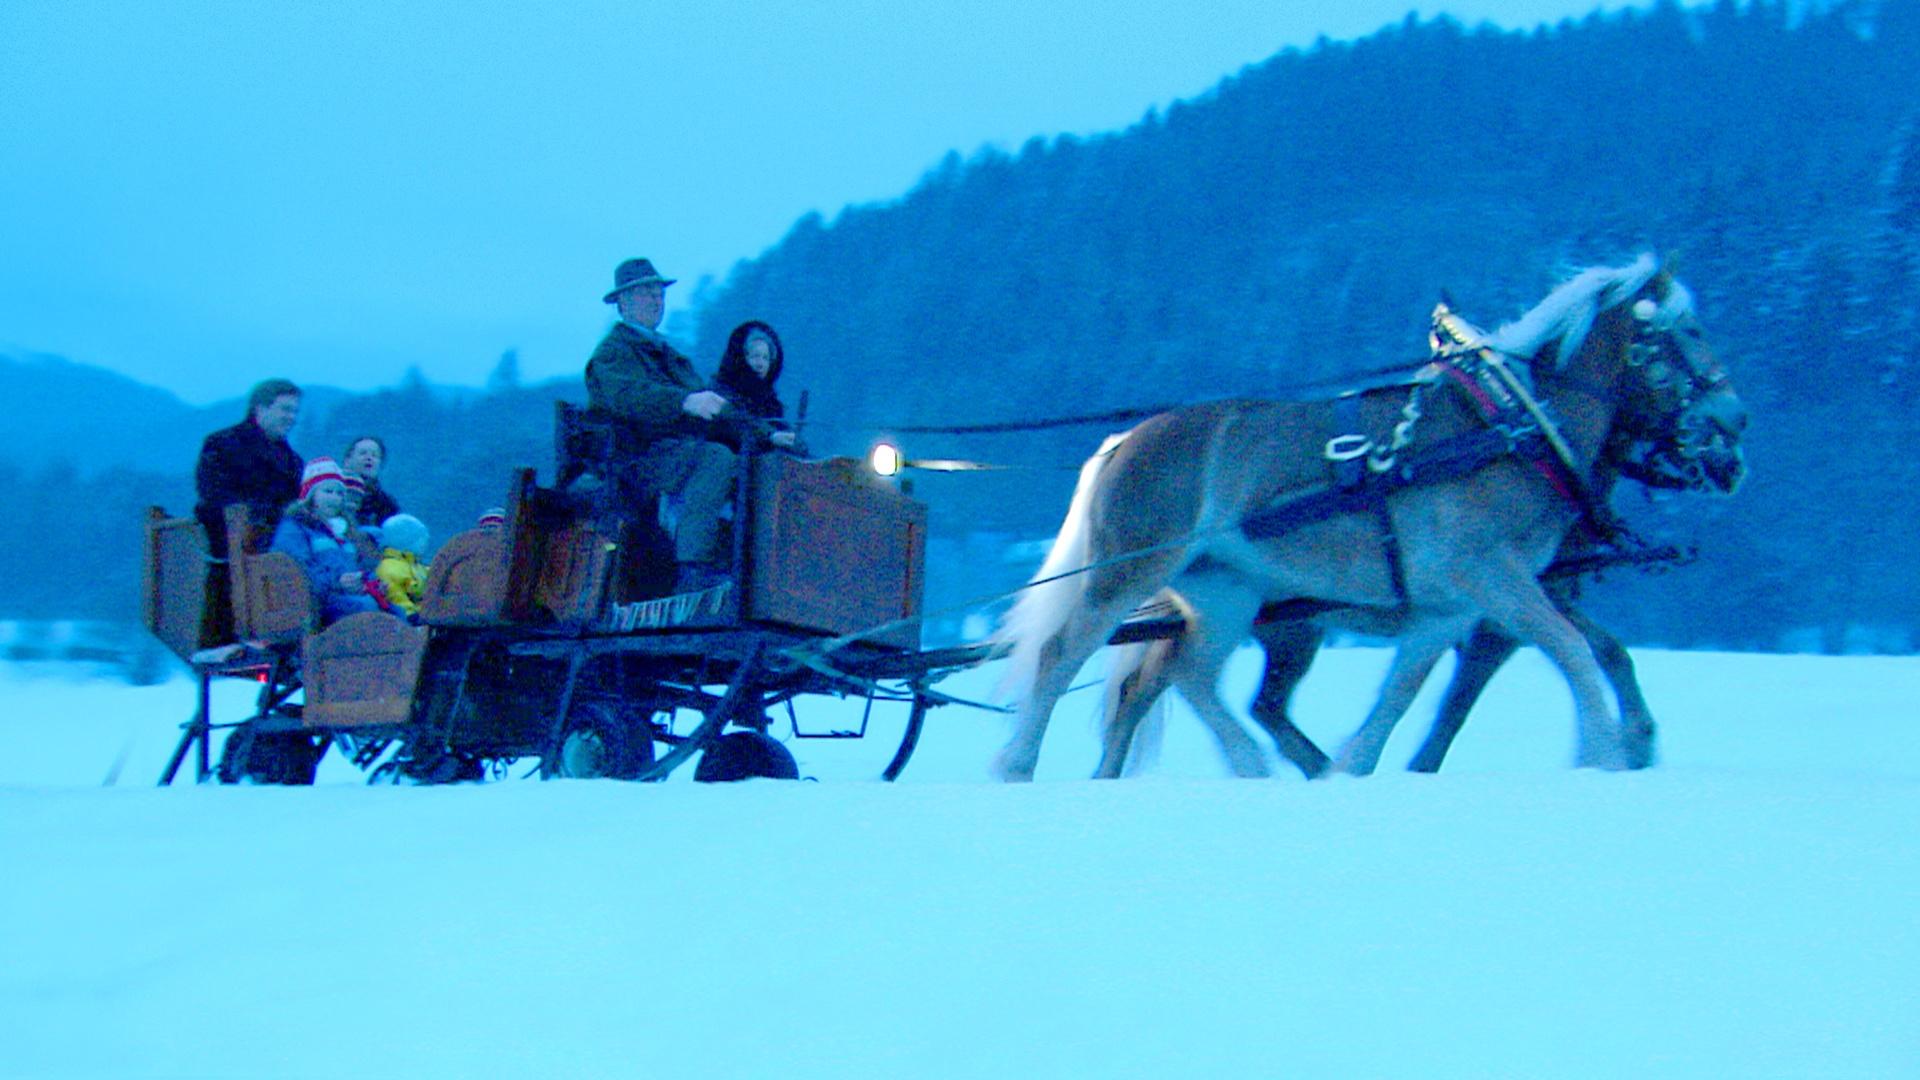 Two horses pulling a sleigh in the snow.